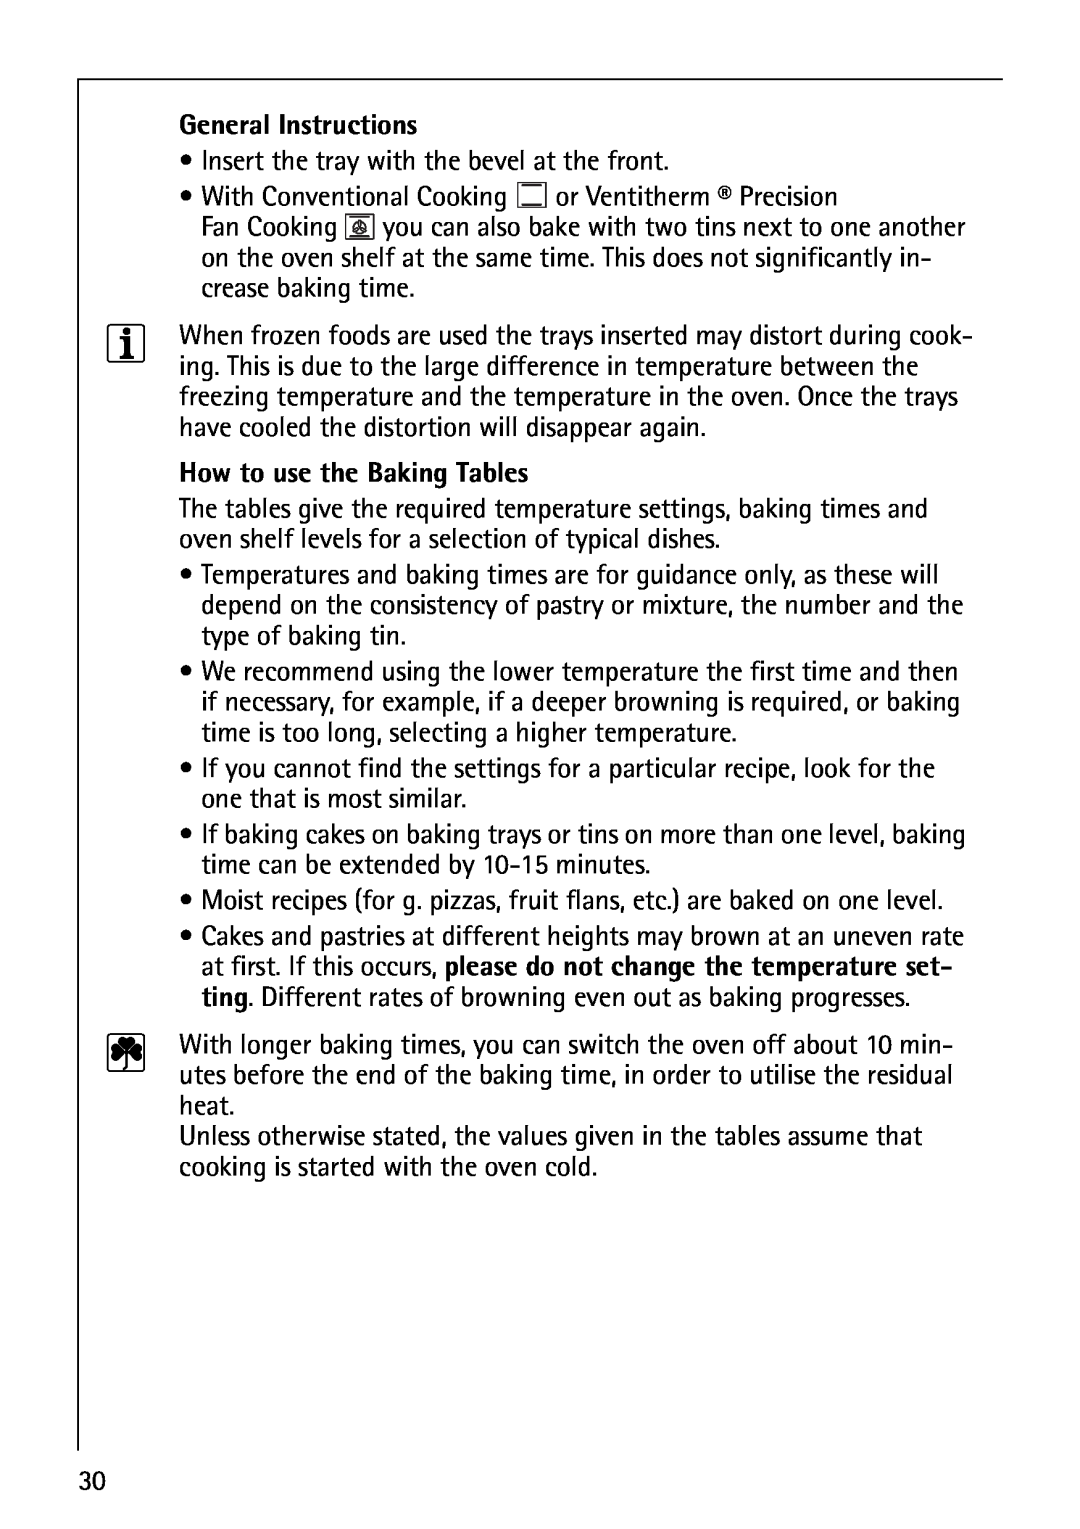 Electrolux B8871-4 manual General Instructions, How to use the Baking Tables 